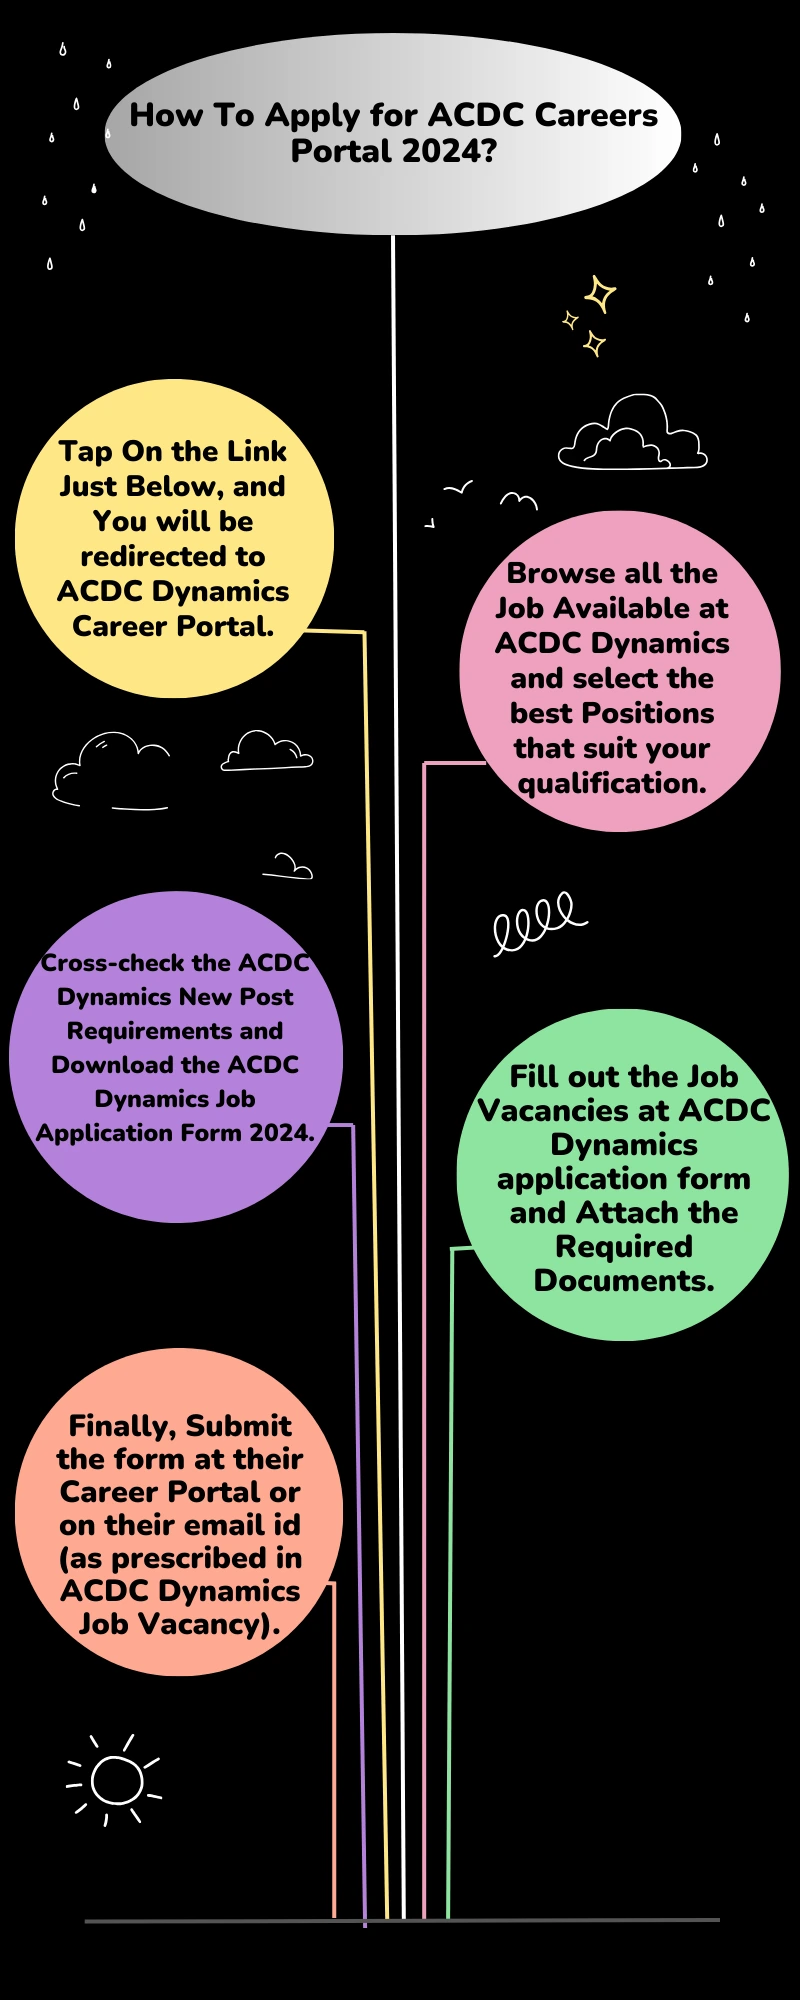 How To Apply for ACDC Careers Portal 2024?